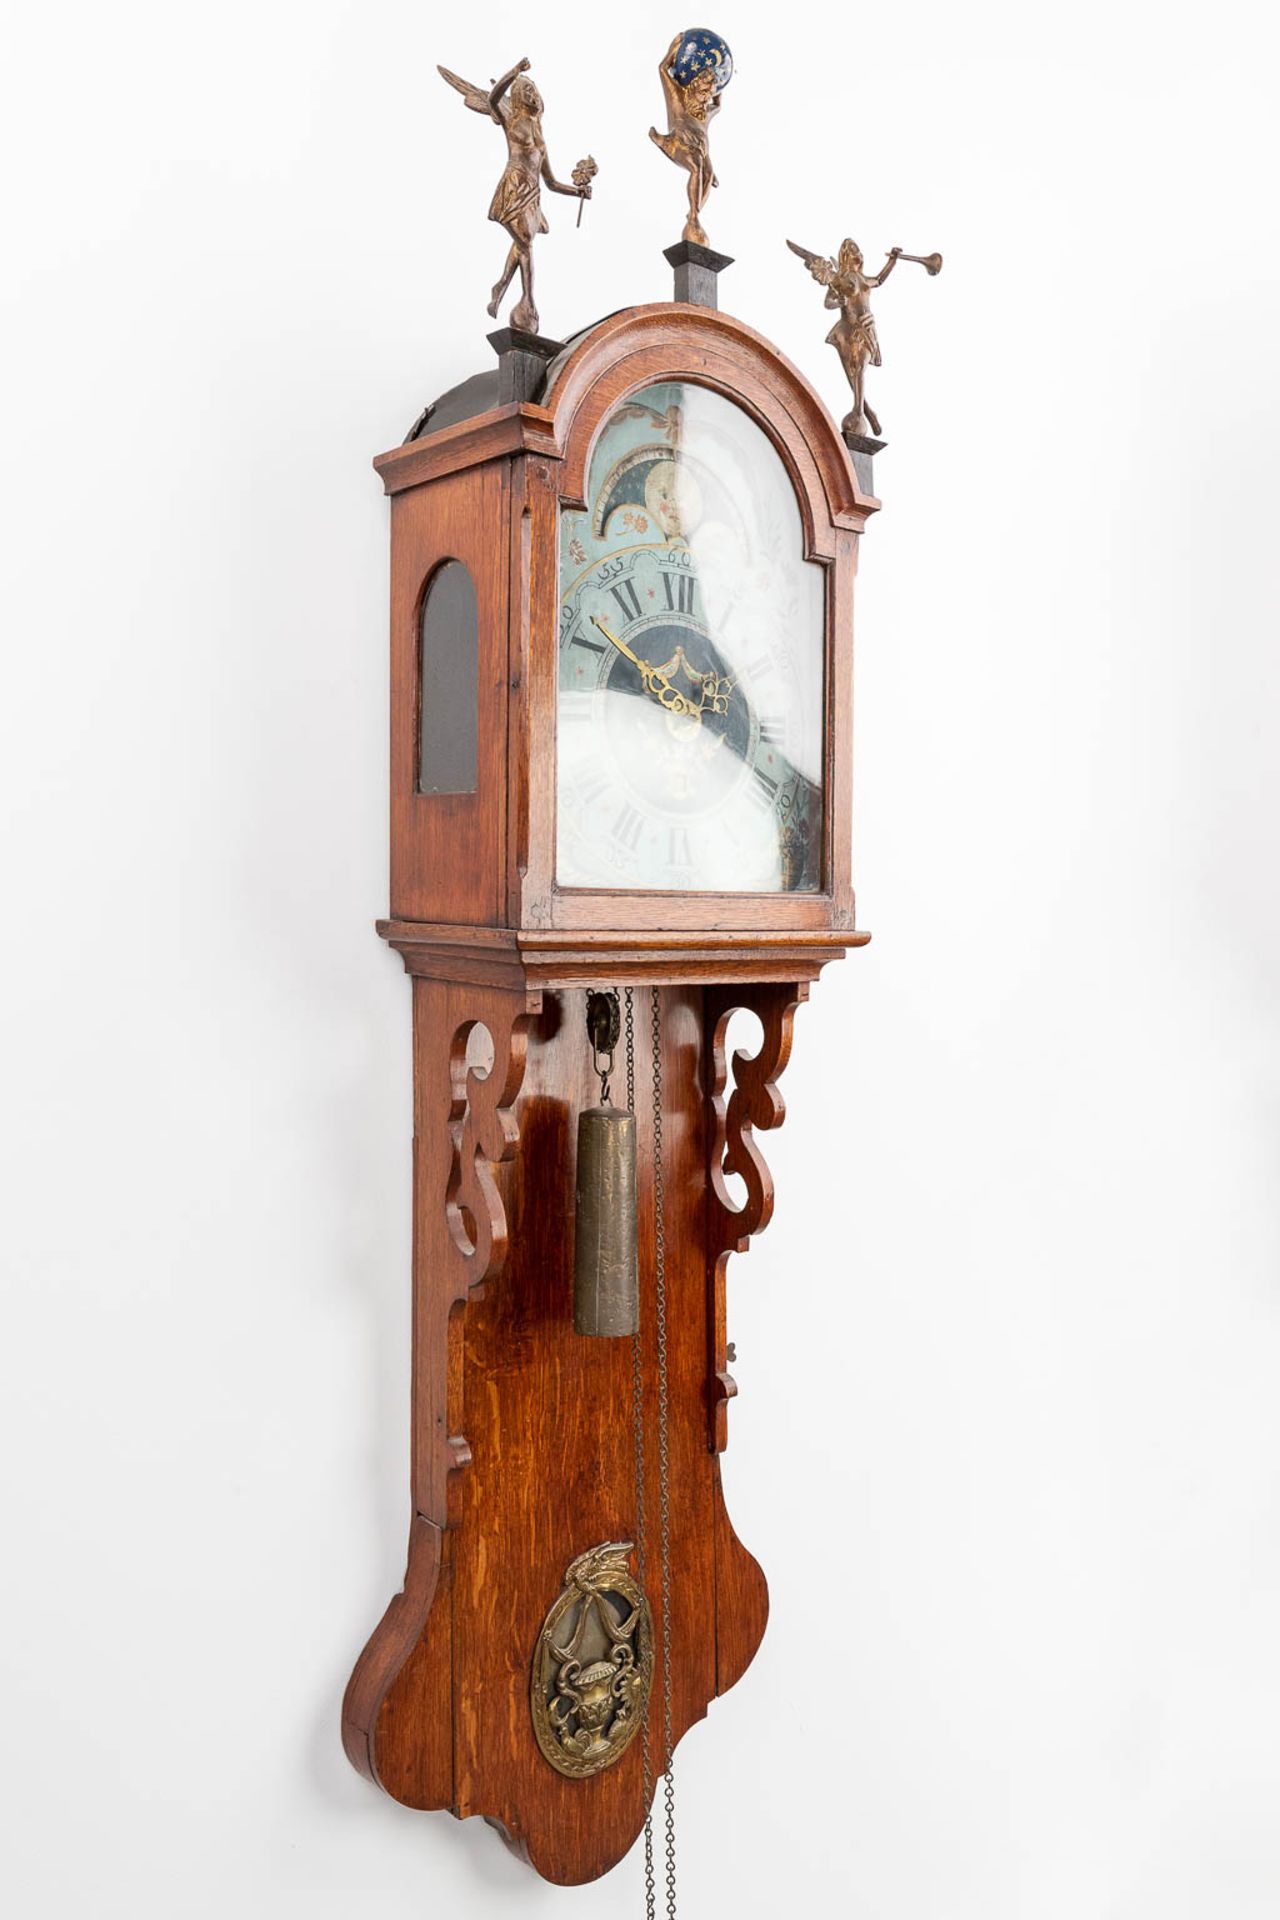 An antique clock, made in Friesland, The Netherlands. 19th C. (L:23 x W:46 x H:153 cm) - Image 4 of 16